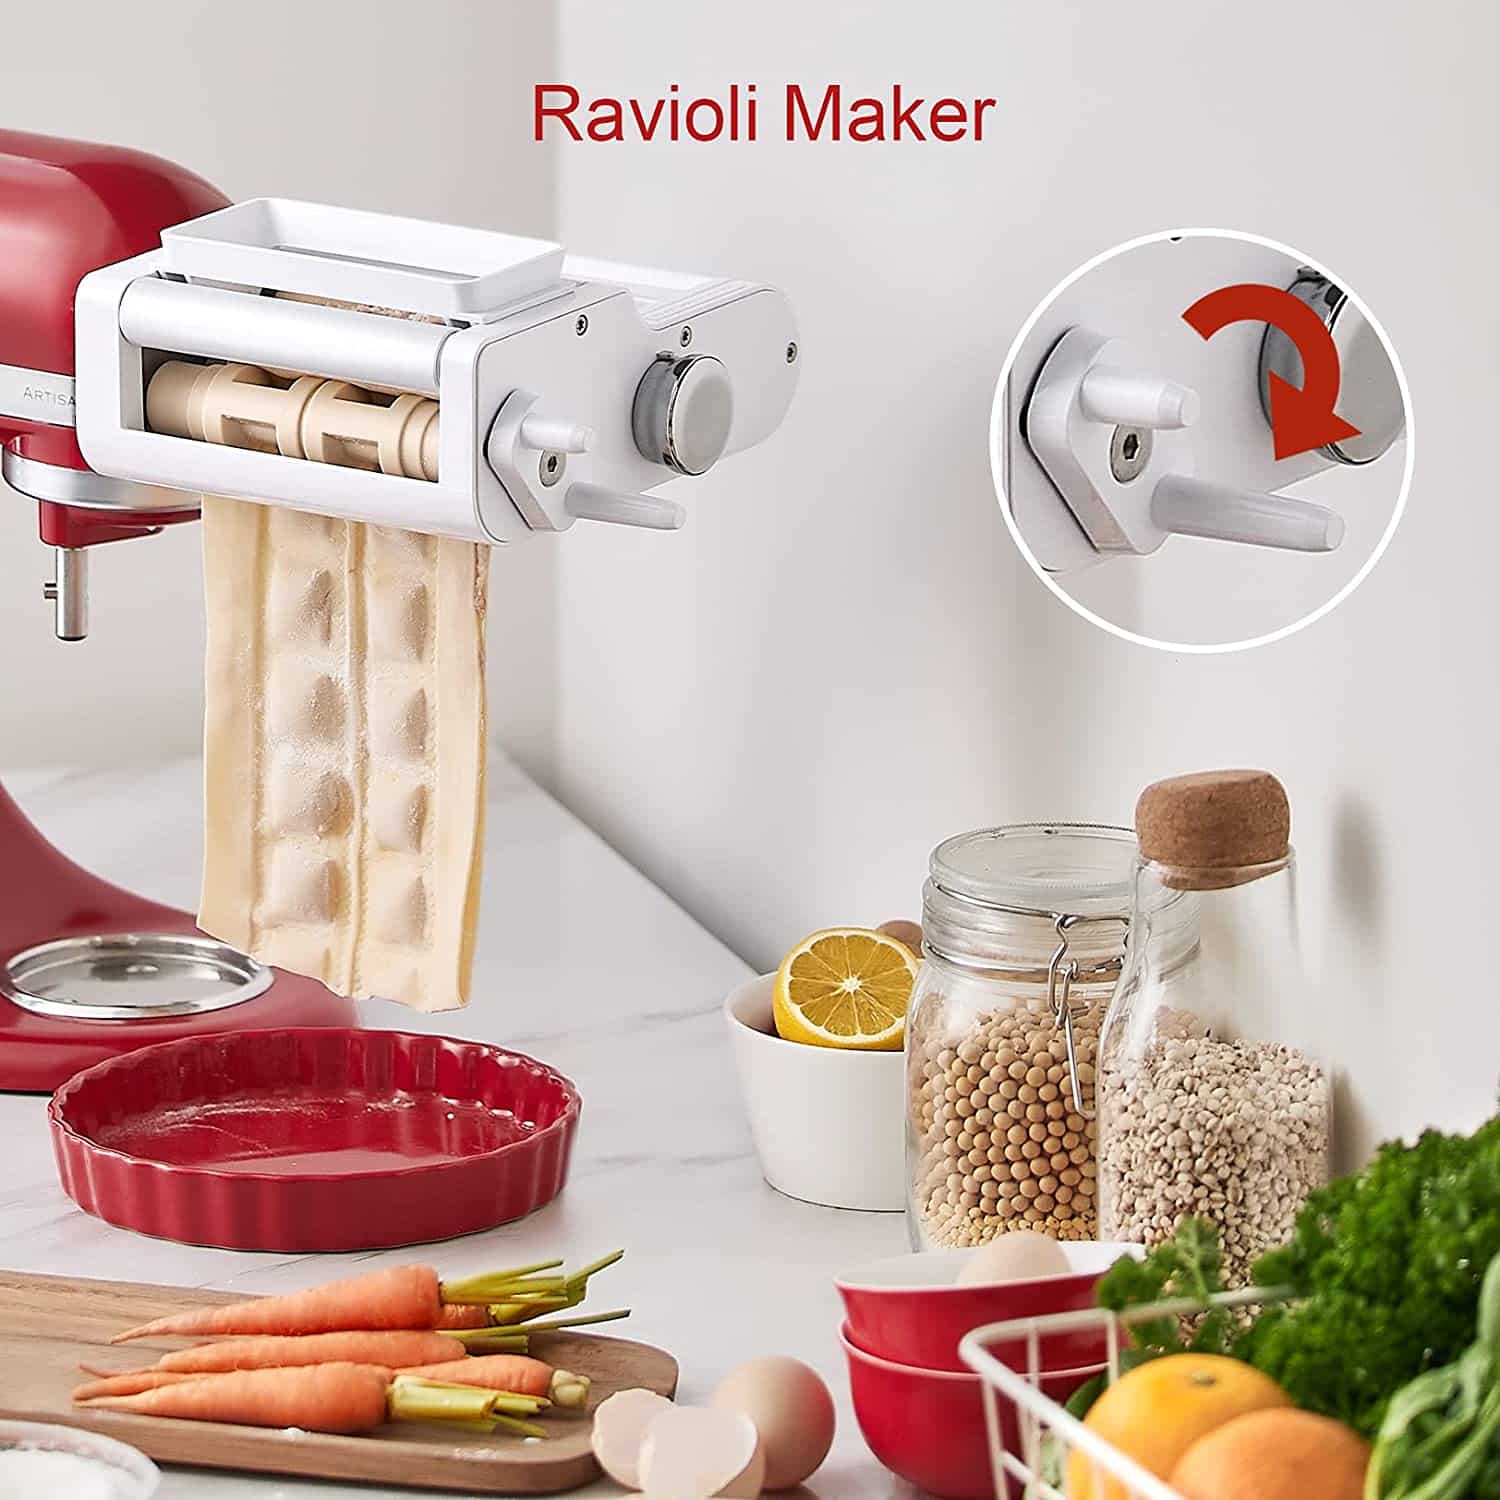 Aintree 3 in 1 Ravioli and Pasta Maker Attachment for Kitchen and Mixers